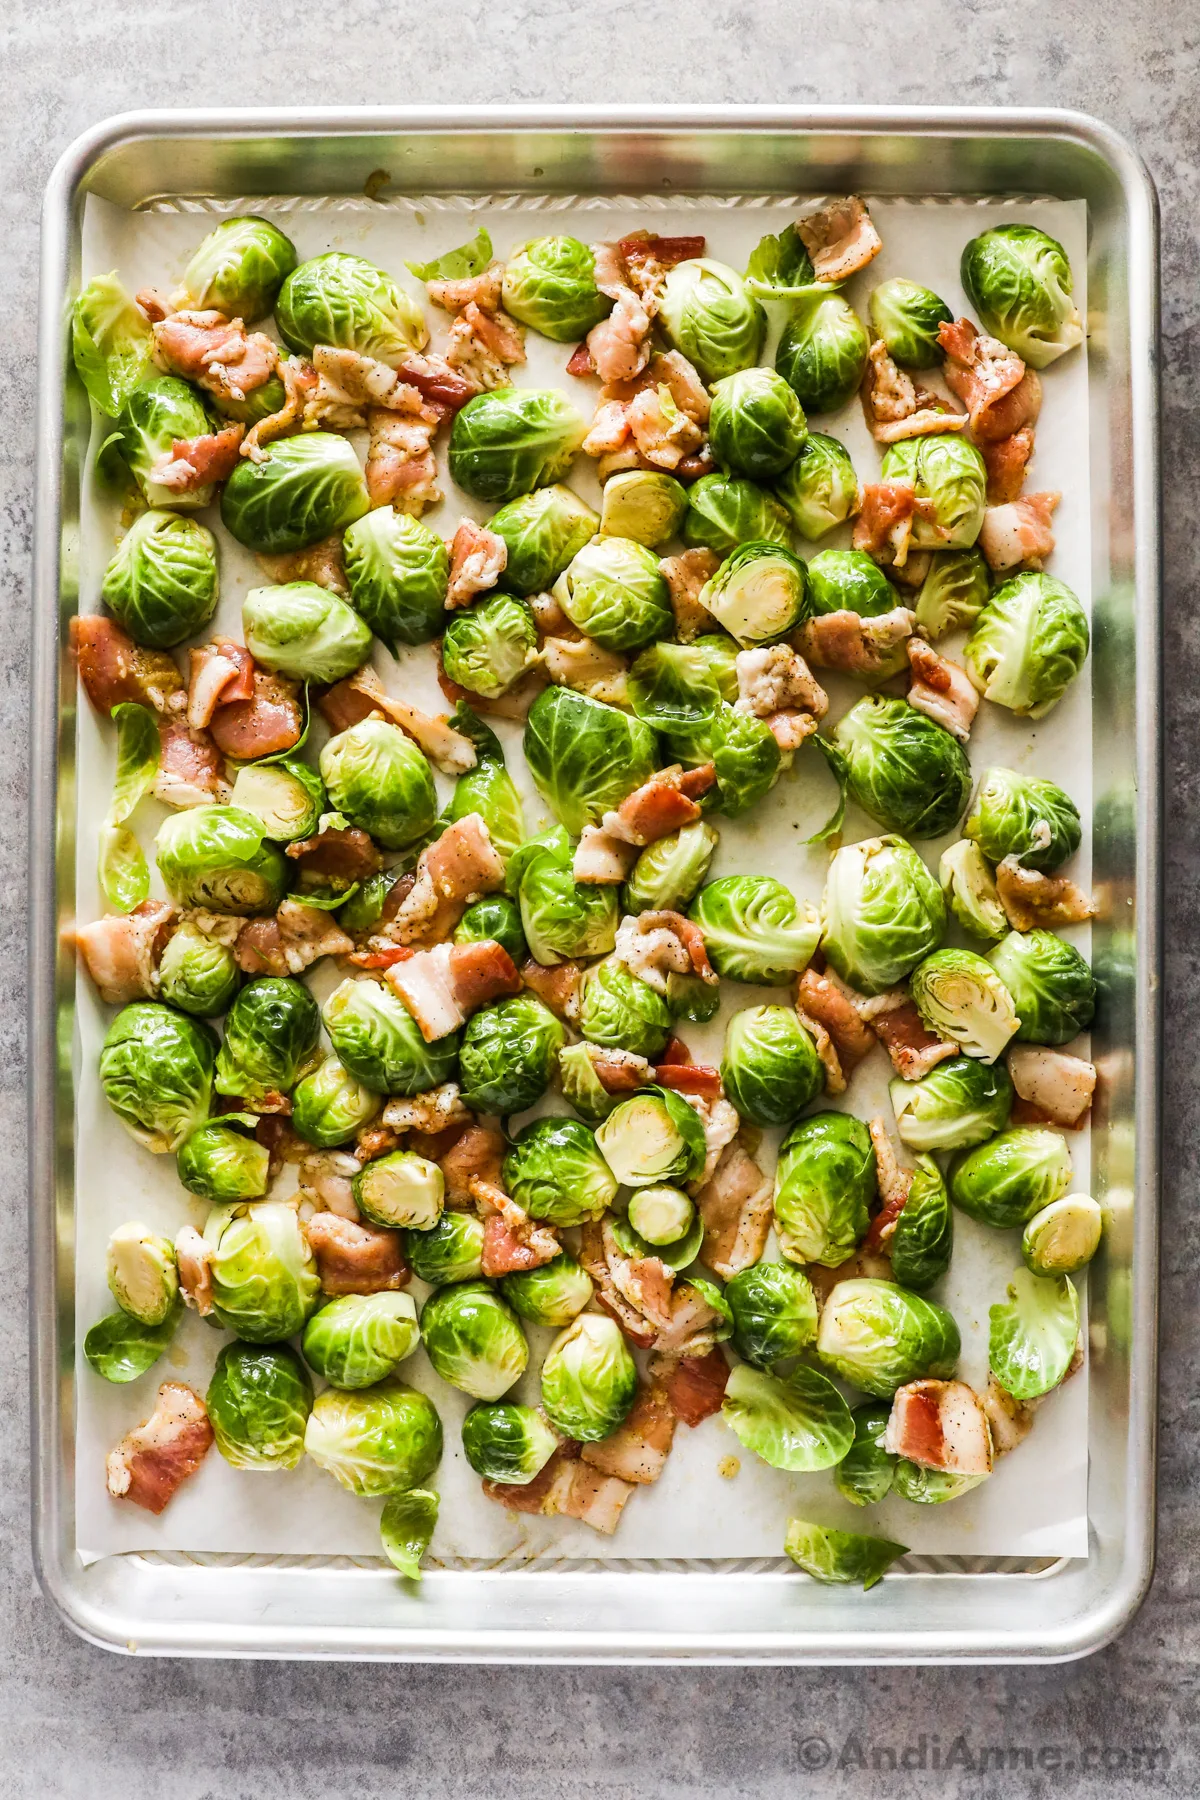 Raw sliced brussels sprouts and bacon pieces on a baking sheet.